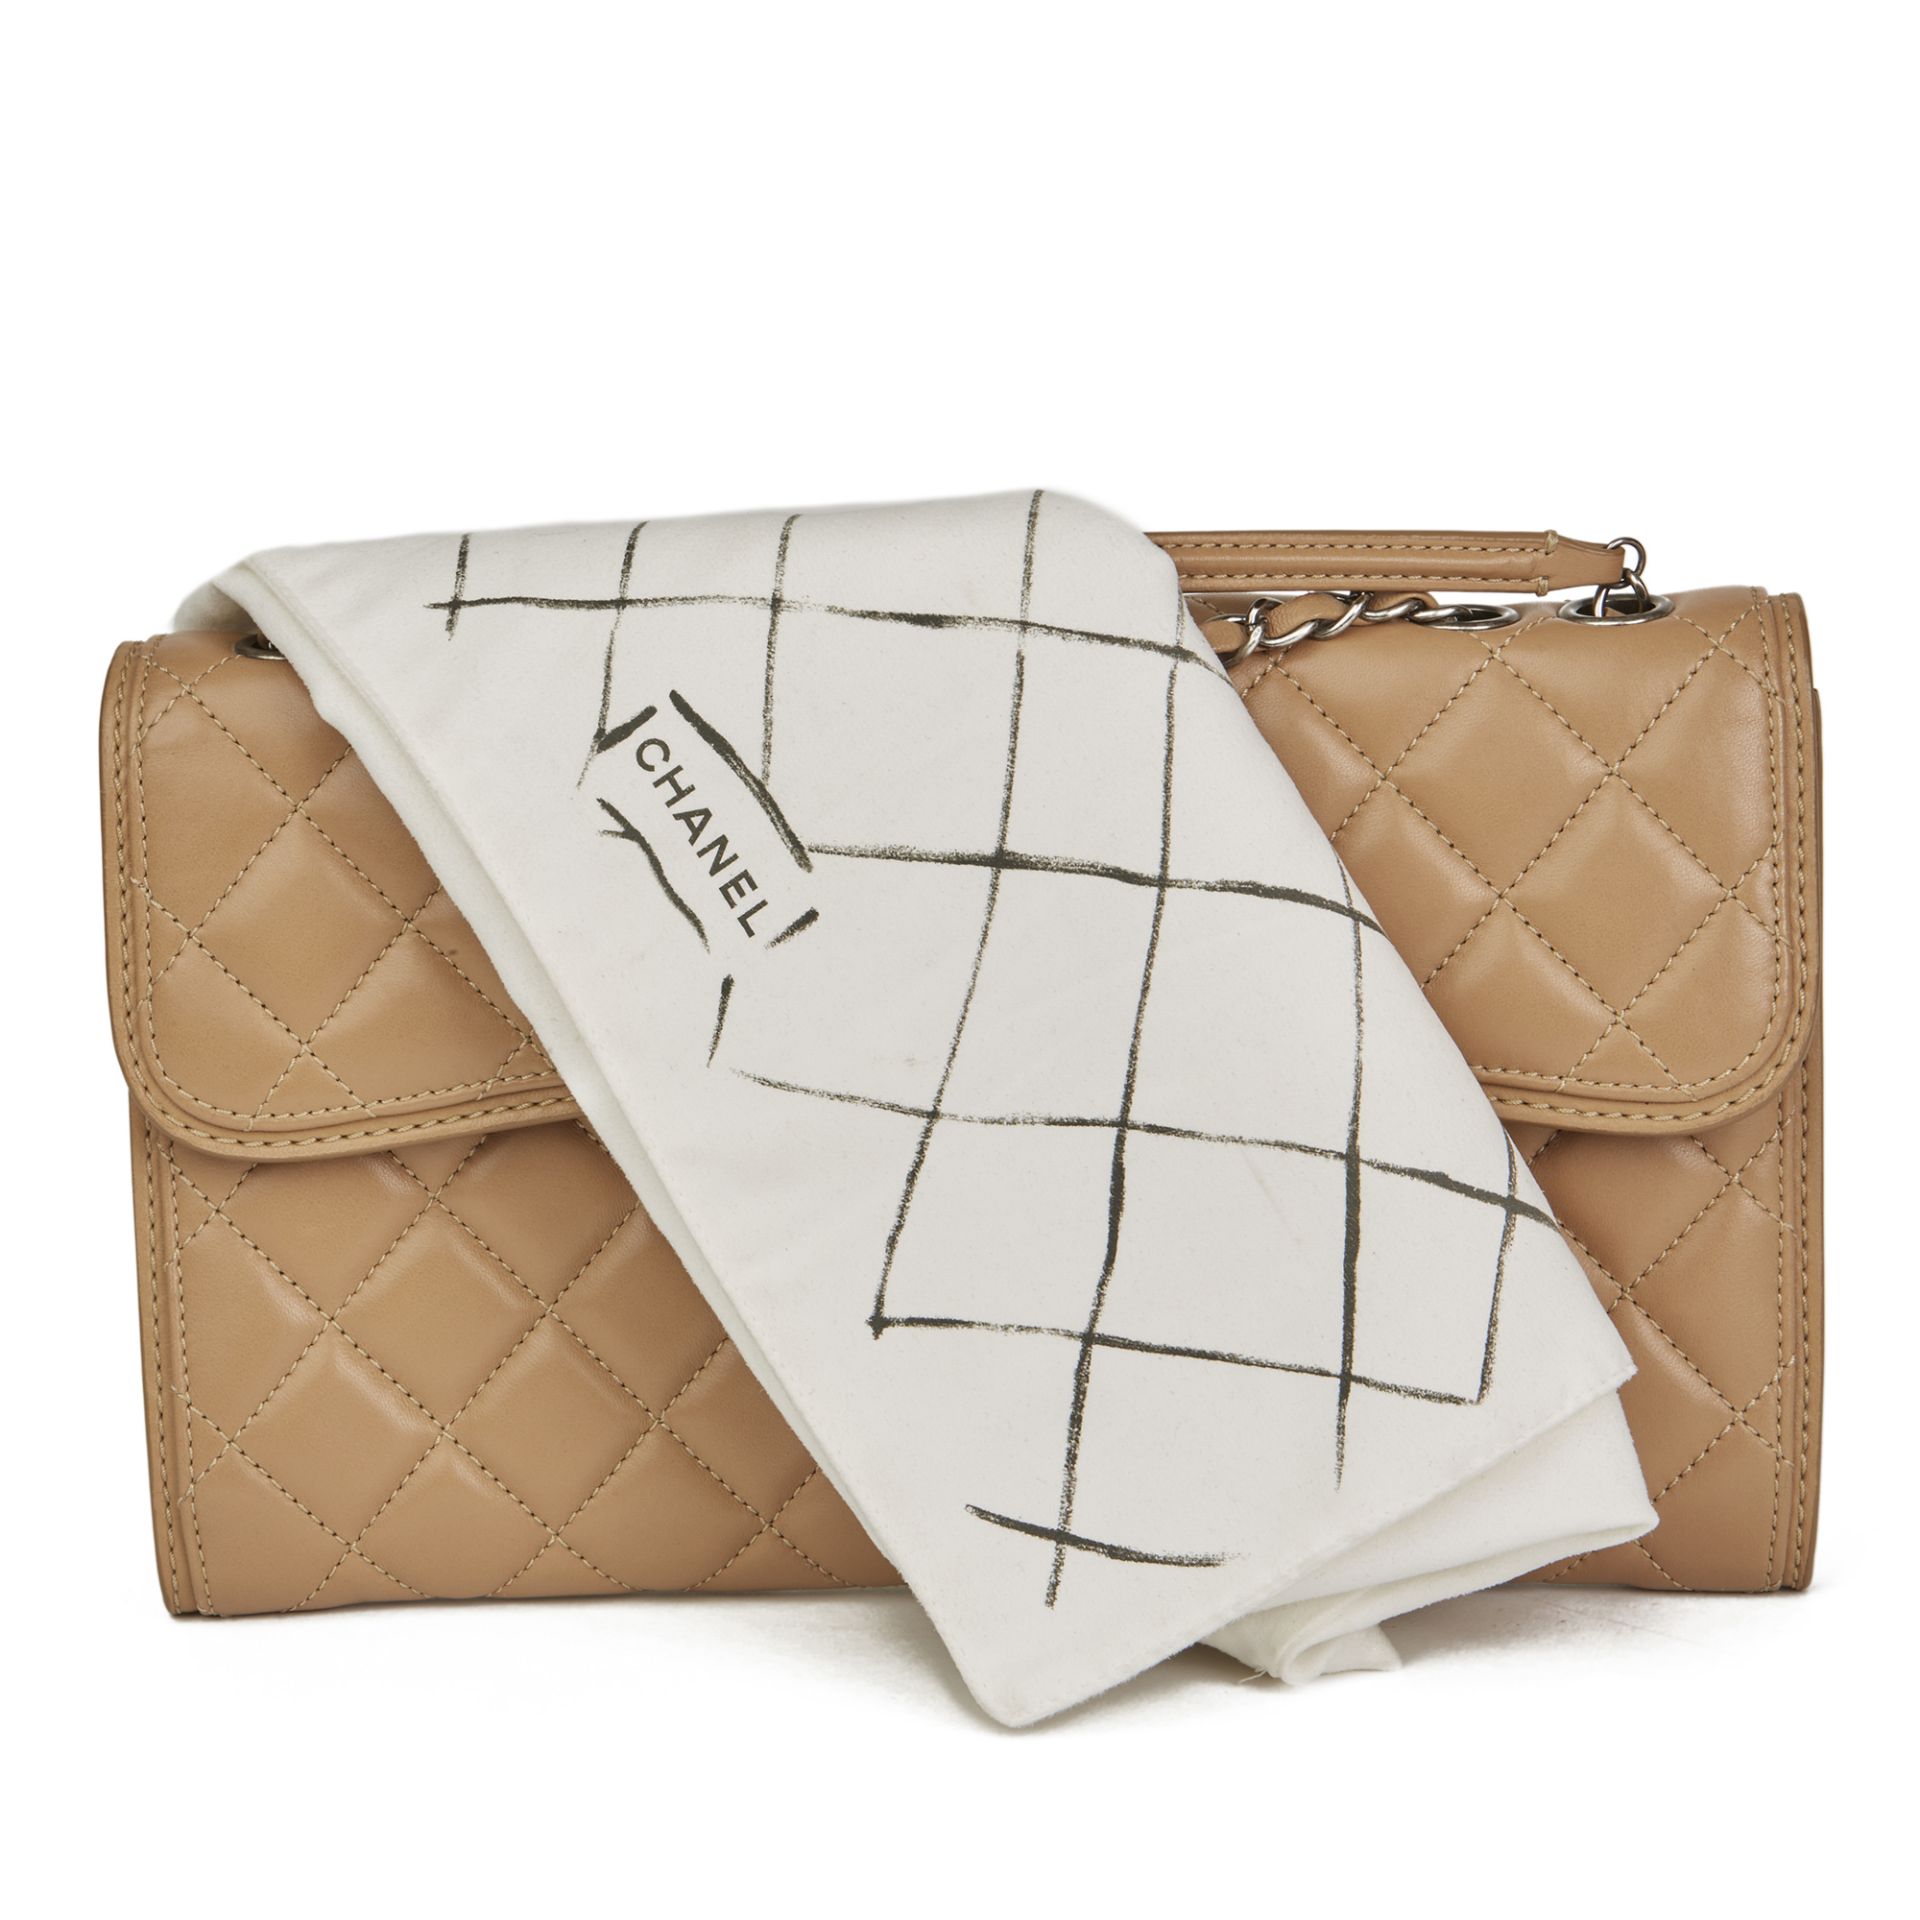 Chanel Mocha Quilted Lambskin Classic Single Flap Bag - Image 3 of 12